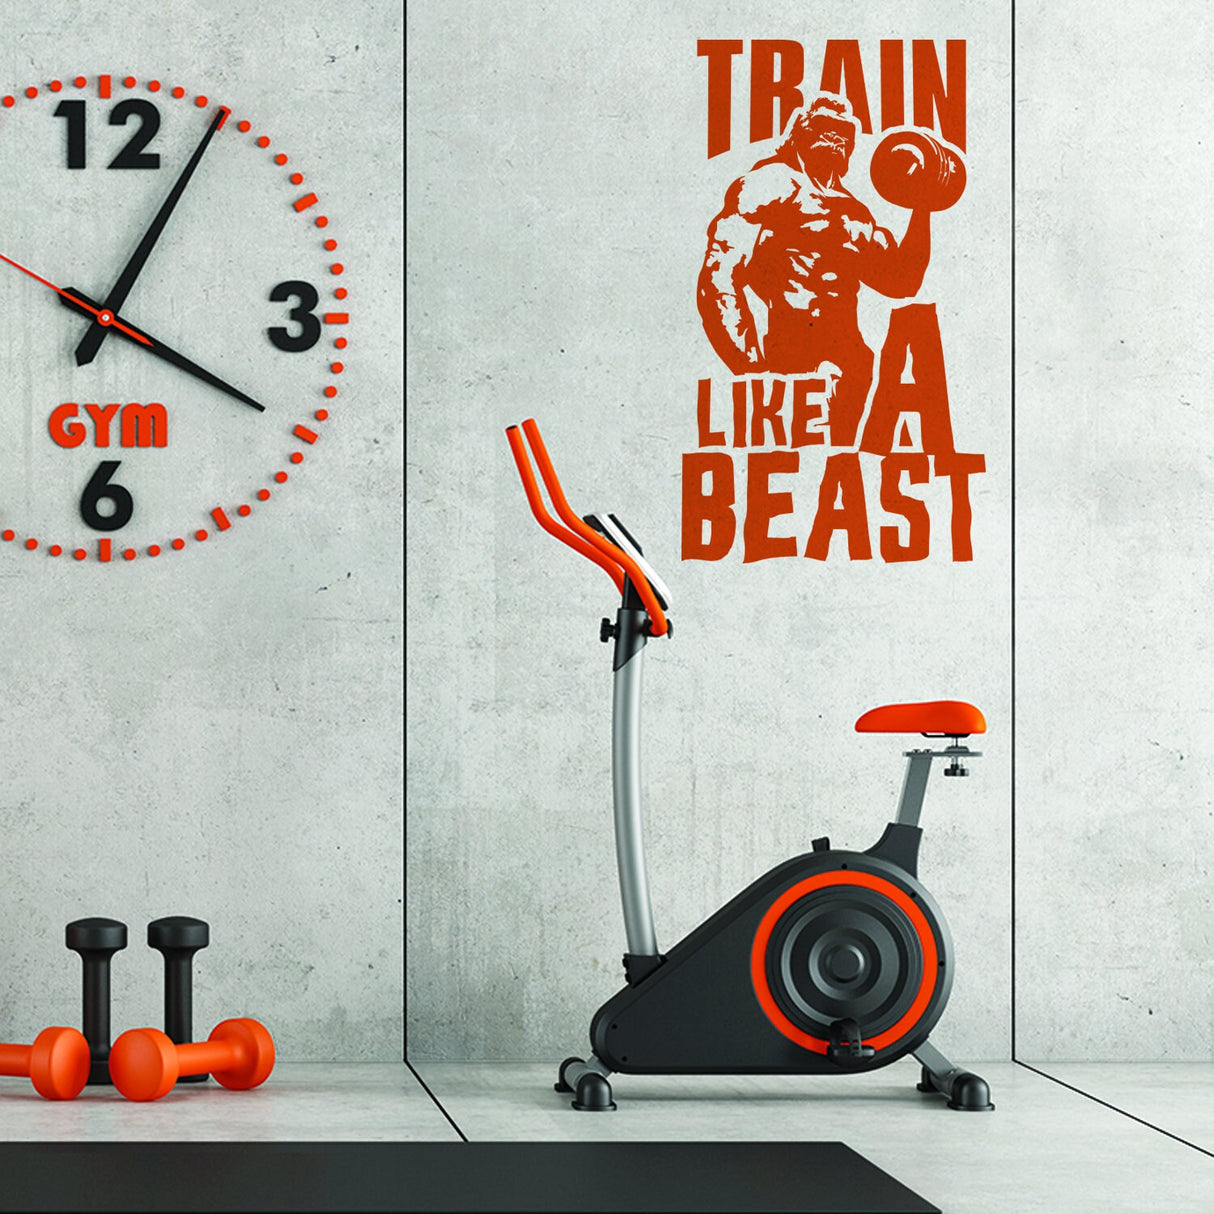 Fitness Gym Wall Workout Decor Vinyl Decal - Inspirational Motivational Sports Stickers Quotes For Exercise Room Beast Mode Sticker Decals